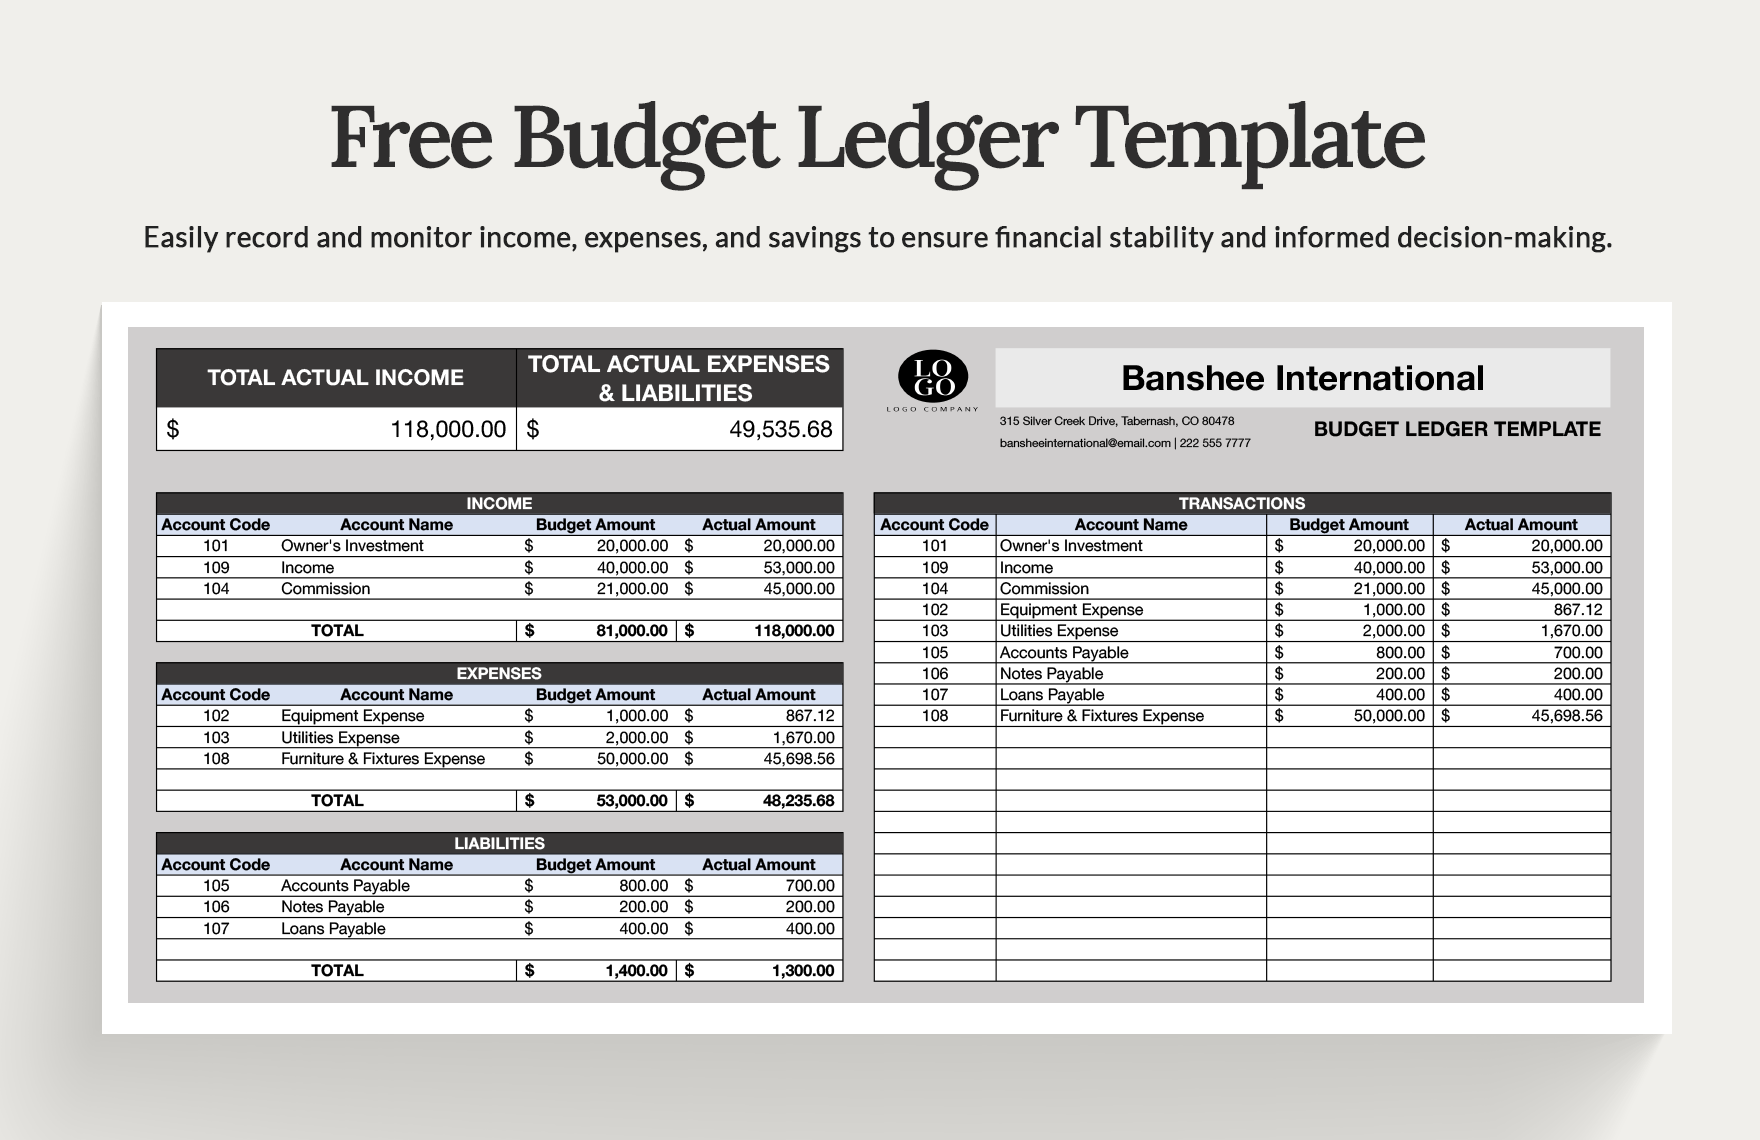 Free Budget Ledger Template in Excel, Google Sheets